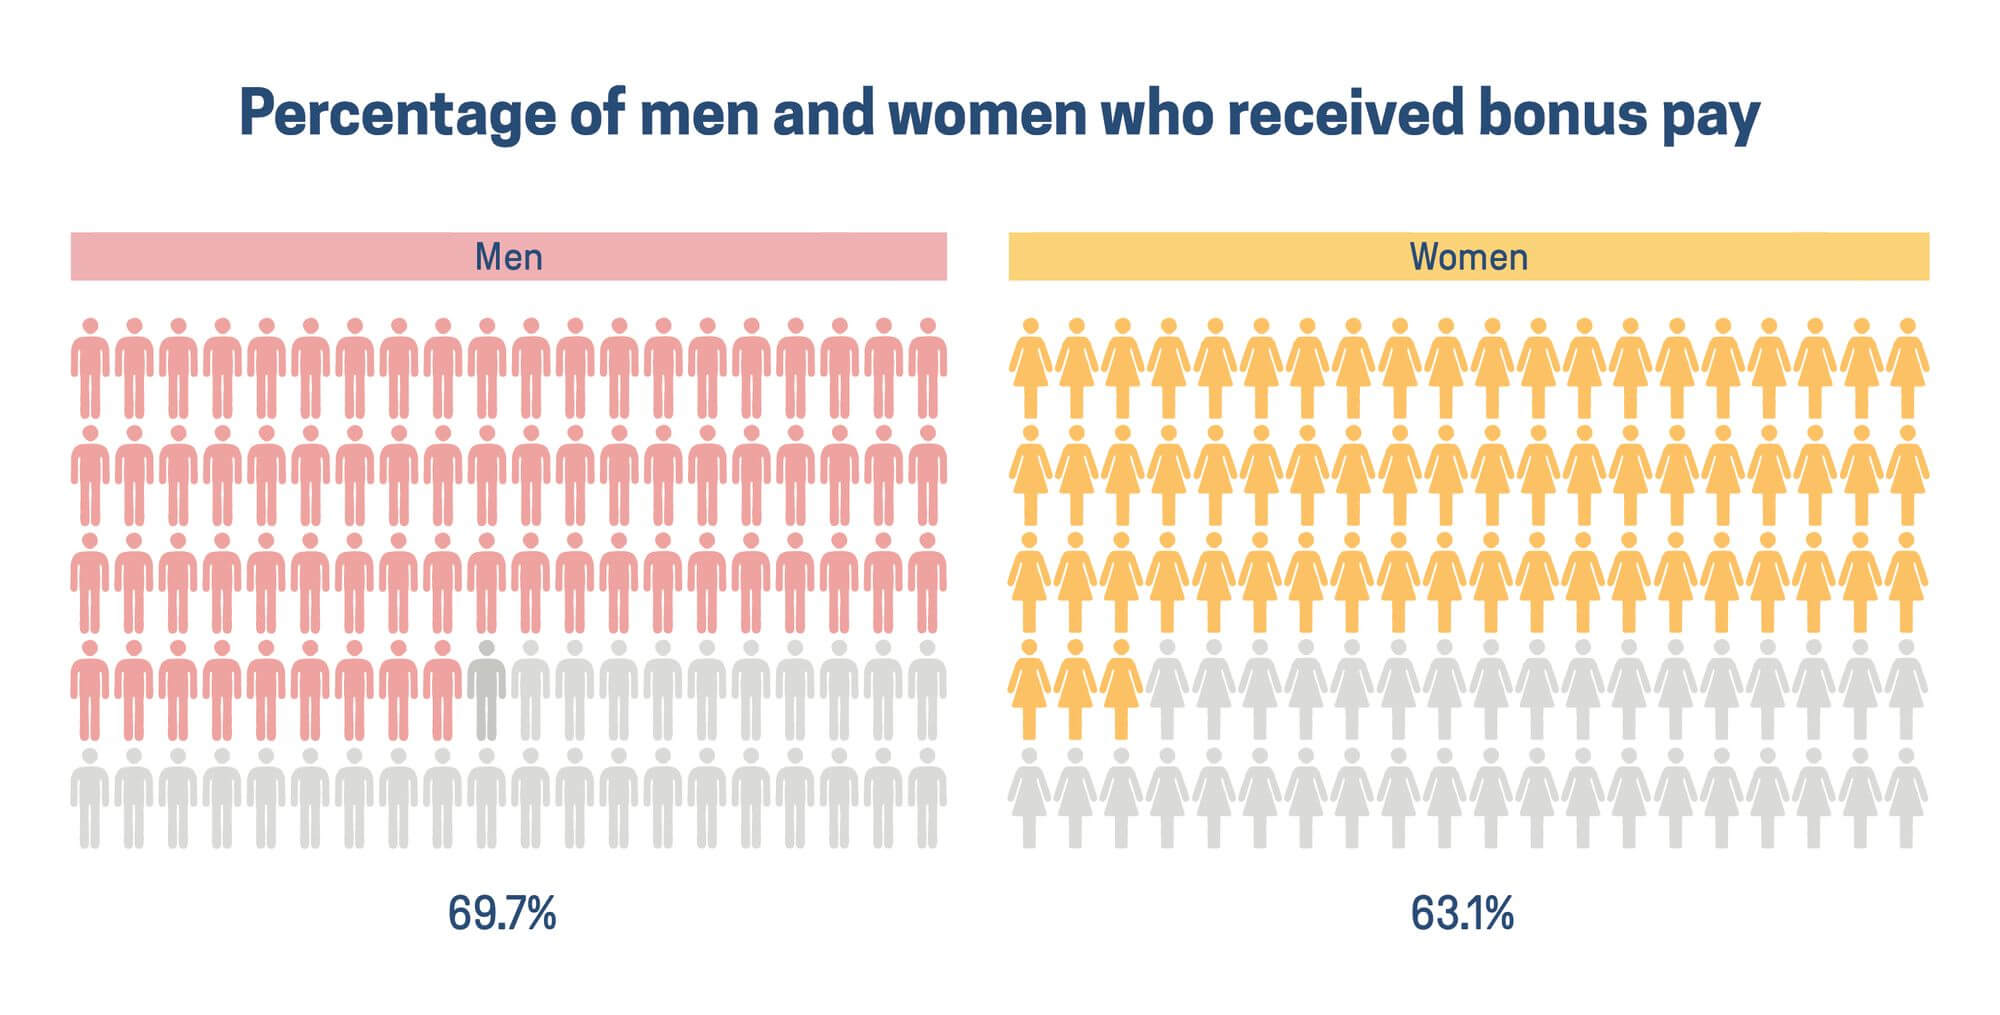 Percentage of men and women who received bonus pay